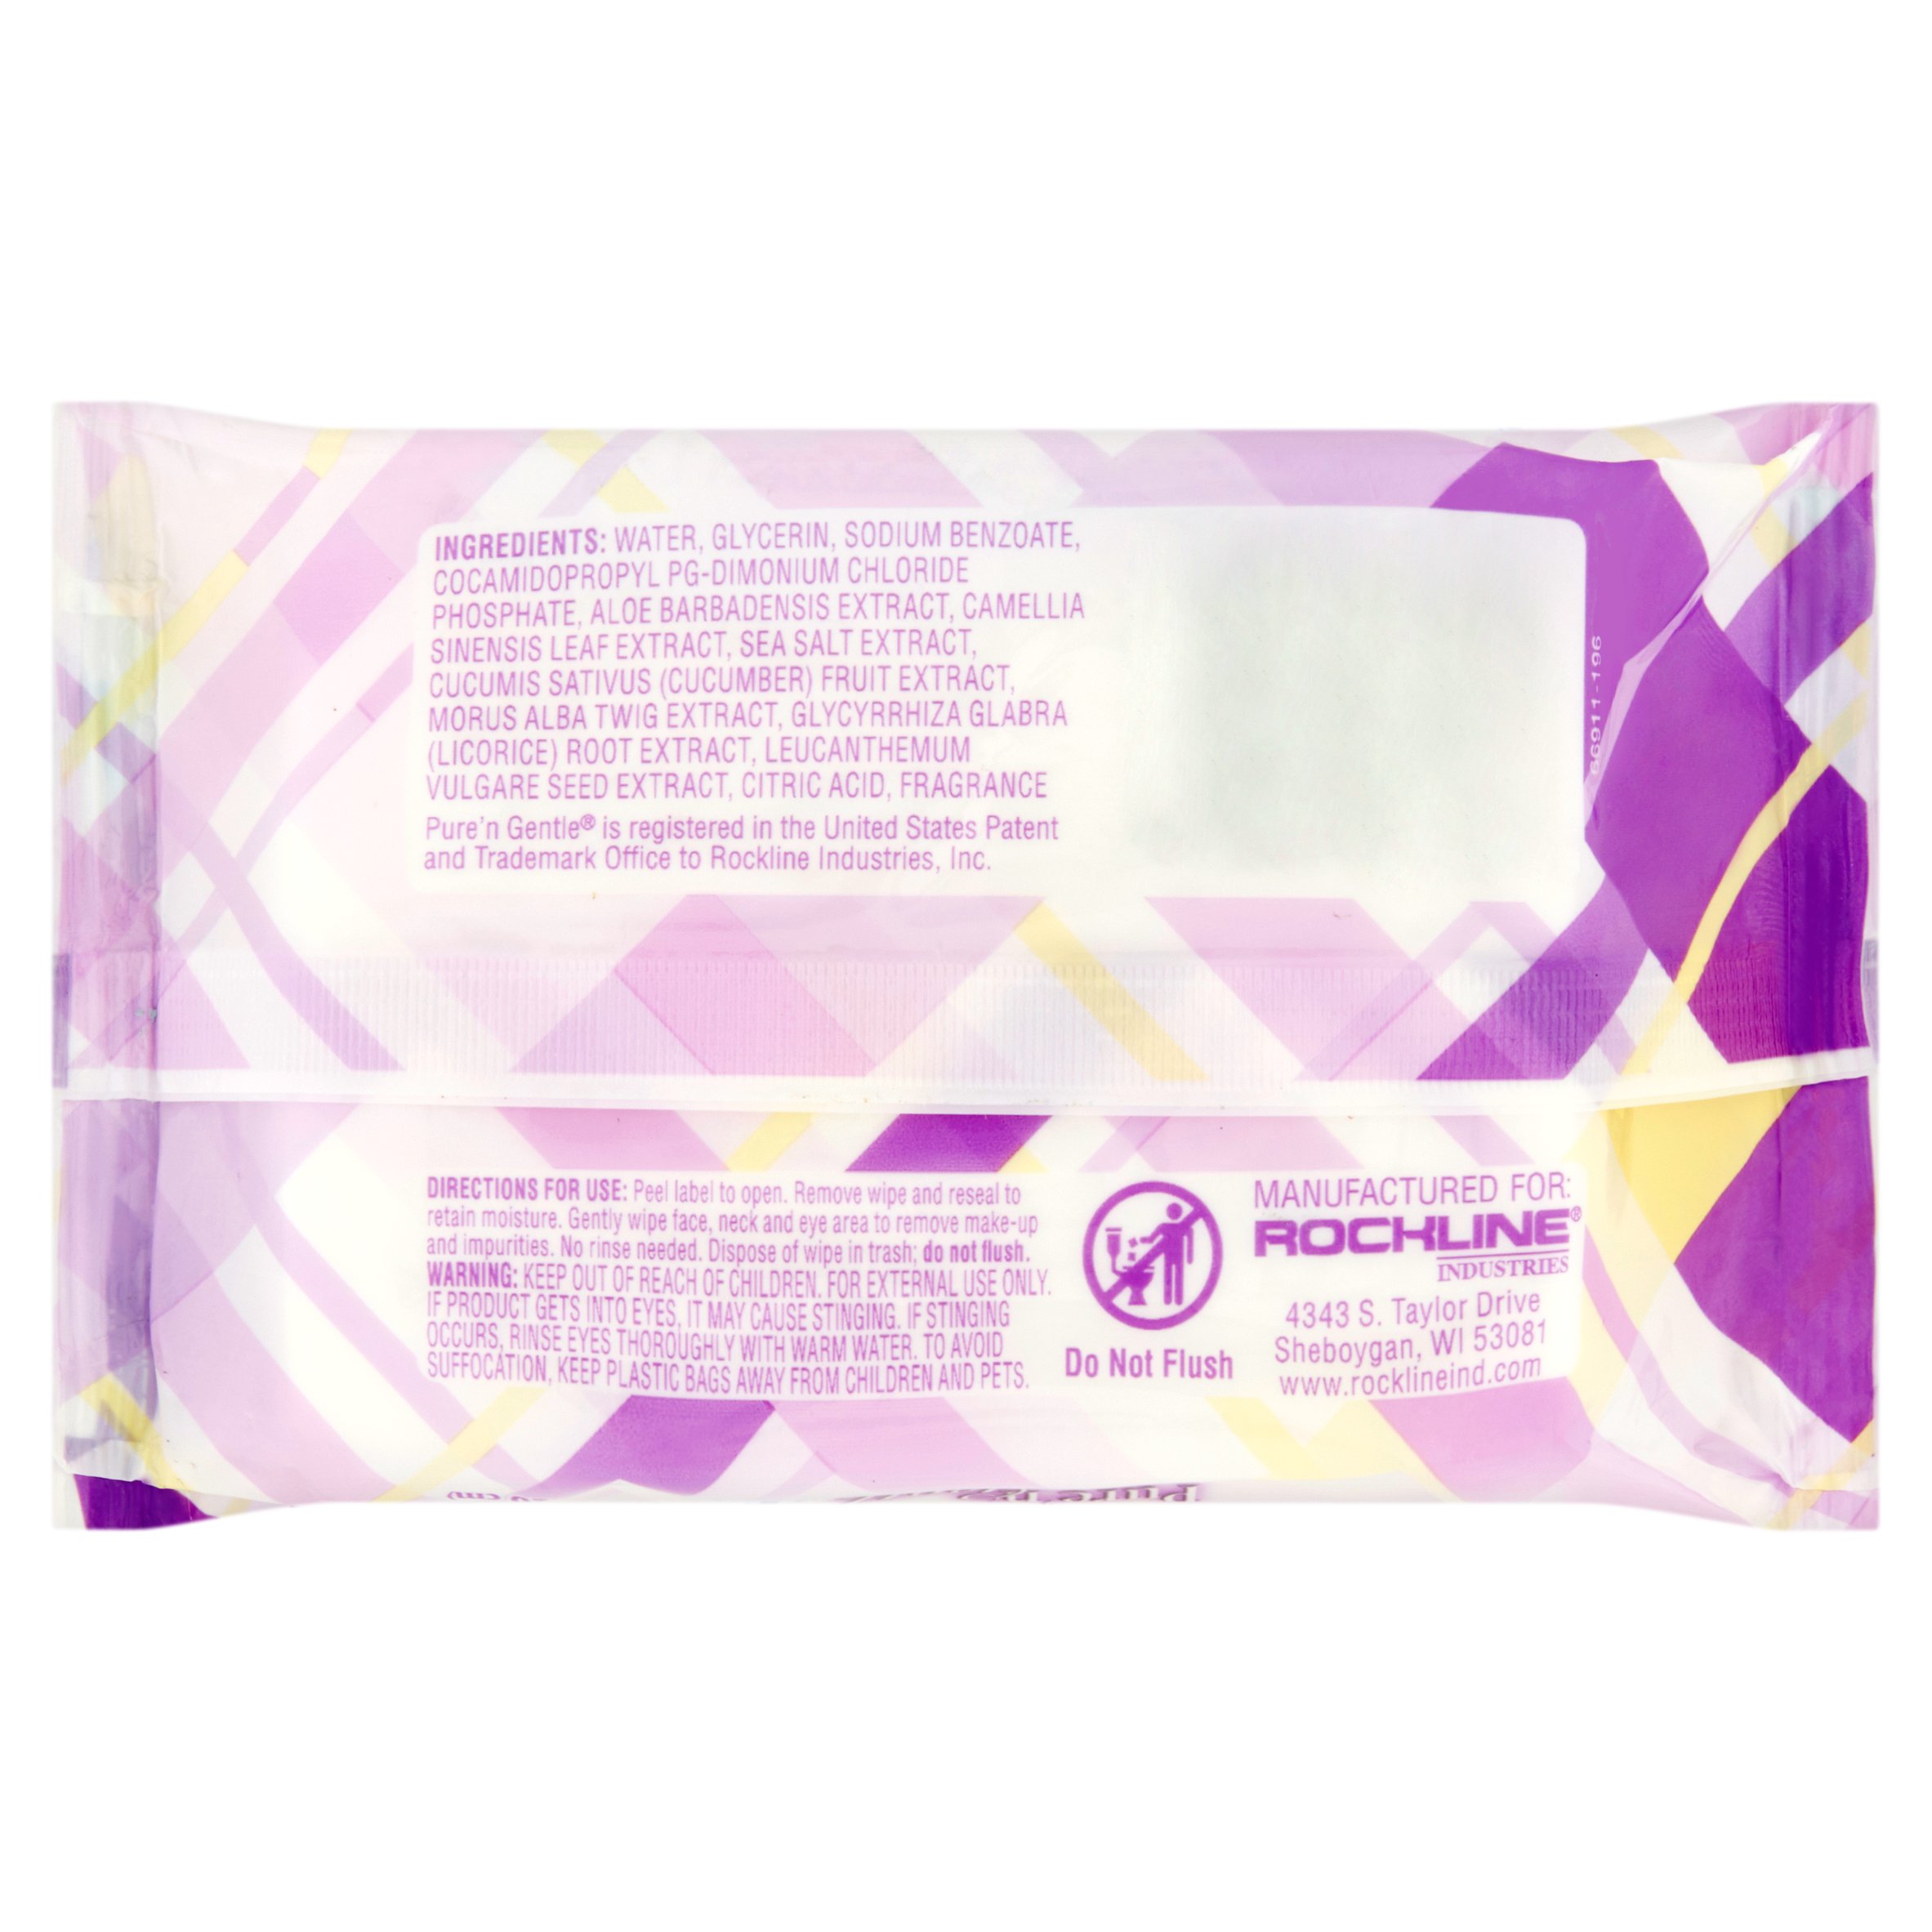 Pure'n Gentle Make-up Remover Wipes, 30 Count - image 4 of 4